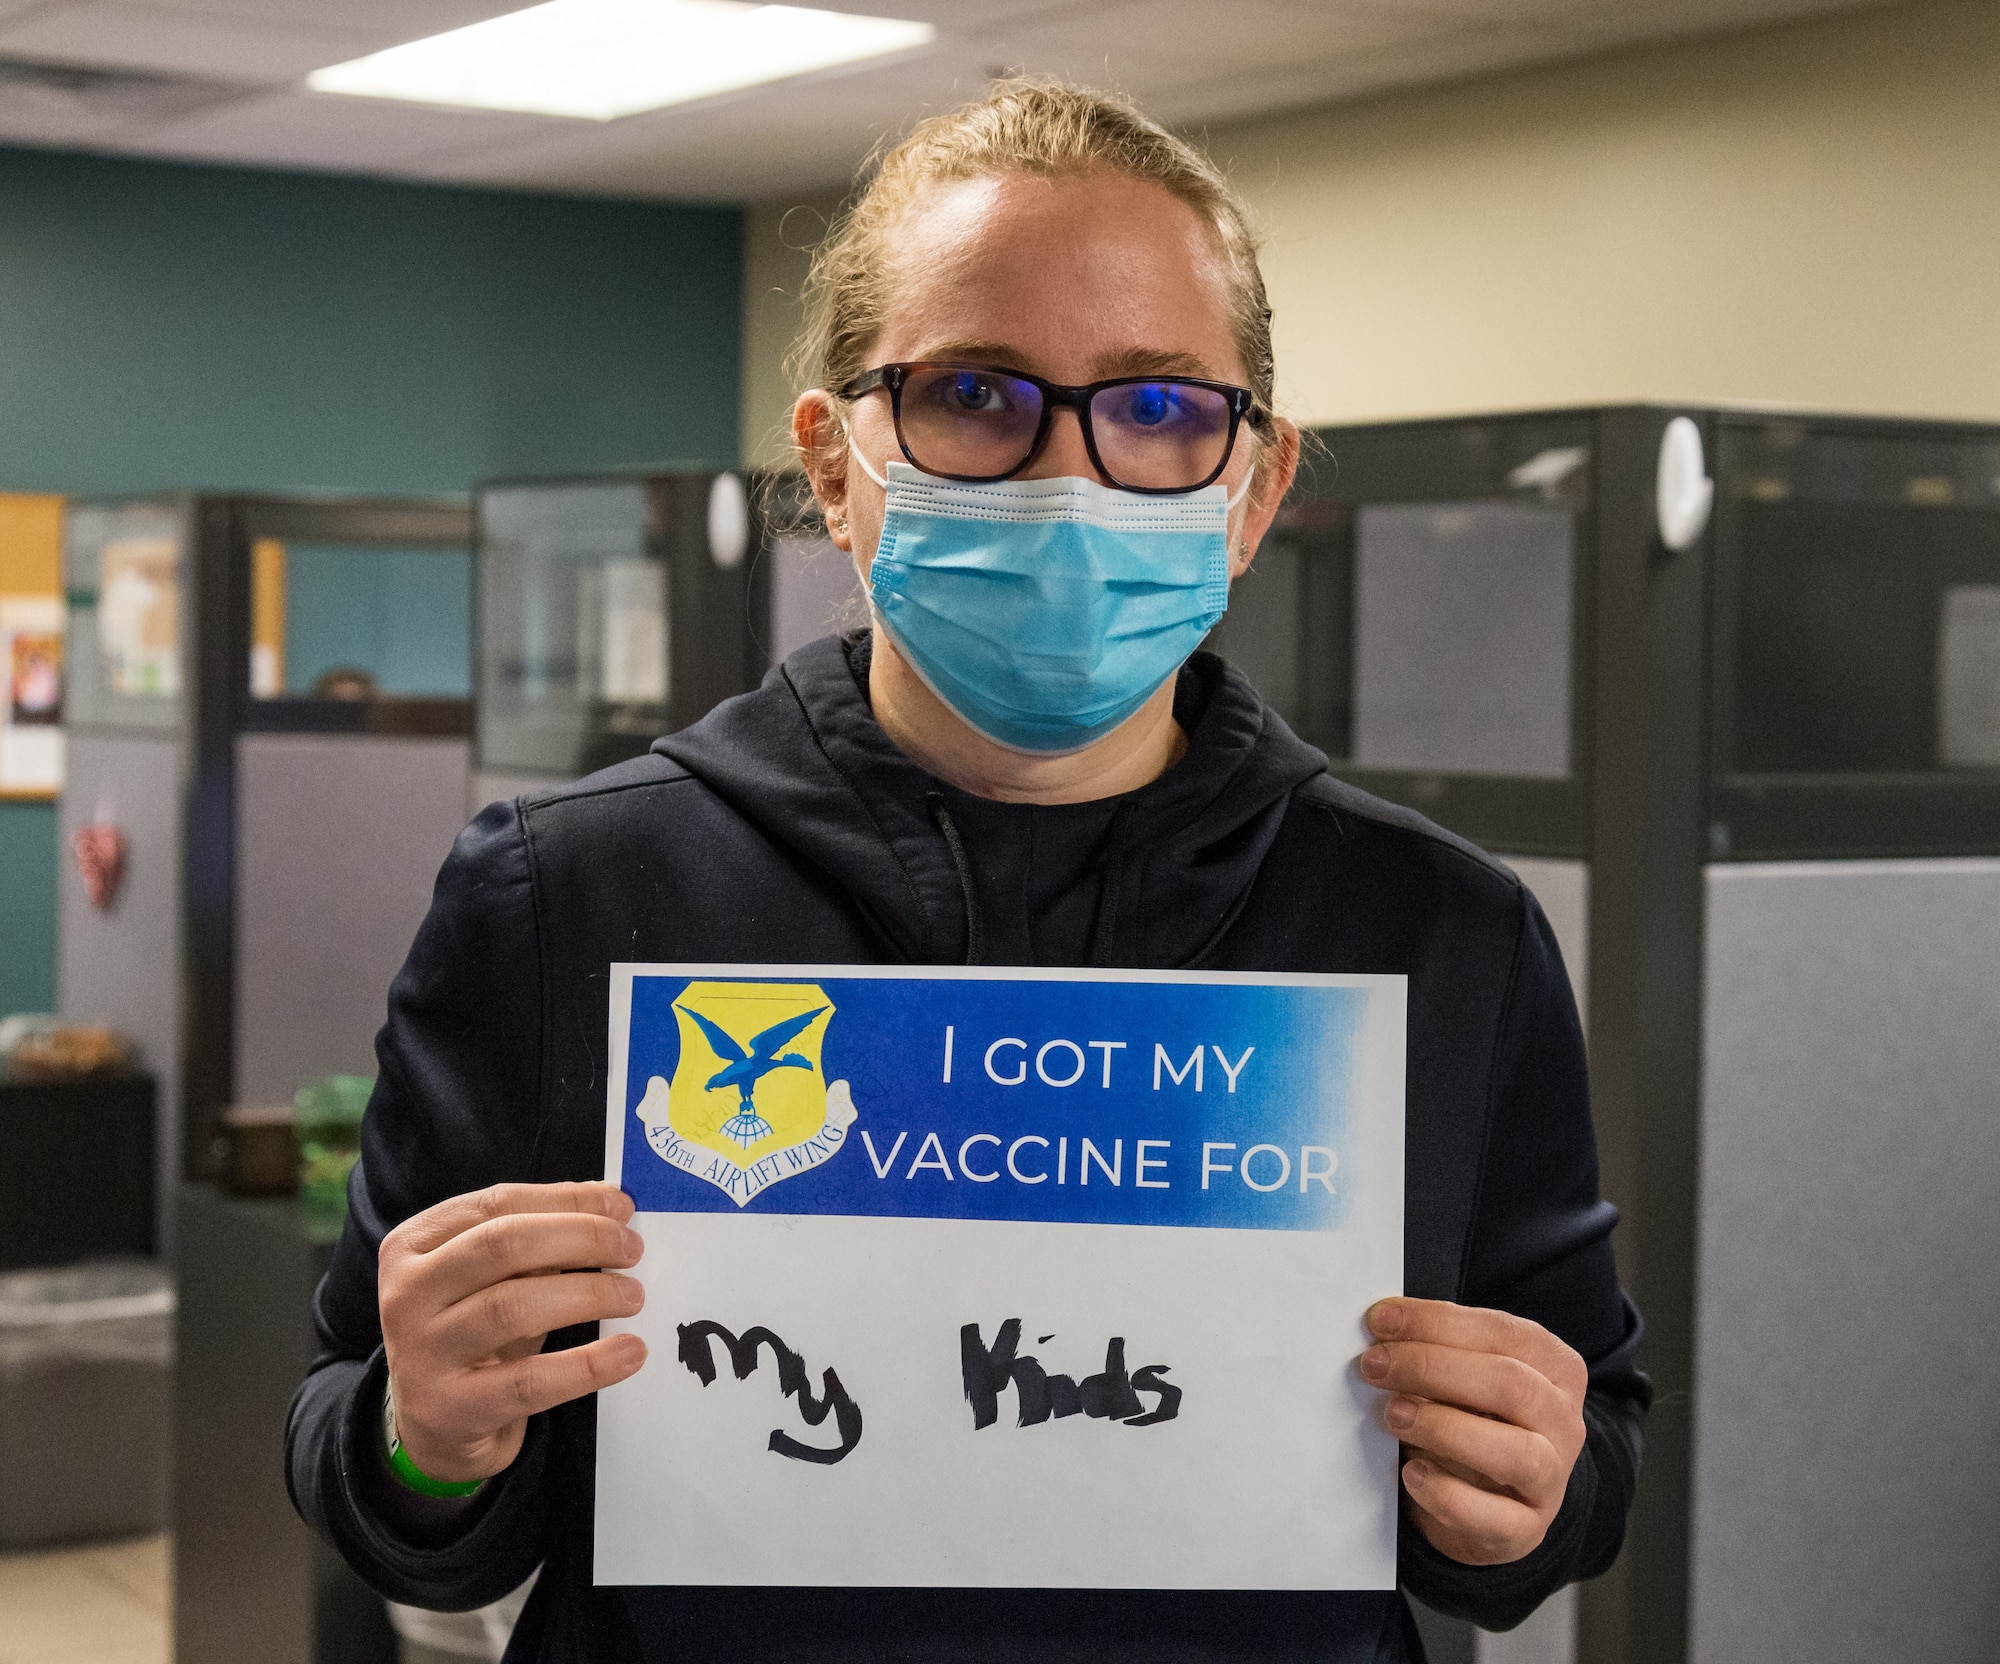 Sarah Carter, Defense Commissary Agency worker, displays a sign stating why she volunteered for the COVID-19 vaccine Jan. 22, 2021, at Dover Air Force Base, Delaware. Carter was among the first Team Dover front-line workers who voluntarily received the vaccine in accordance with Department of Defense guidance. The vaccine was granted emergency use authorization by the U.S. Food and Drug Administration for use in prevention of COVID-19. (U.S. Air Force photo by Roland Balik)